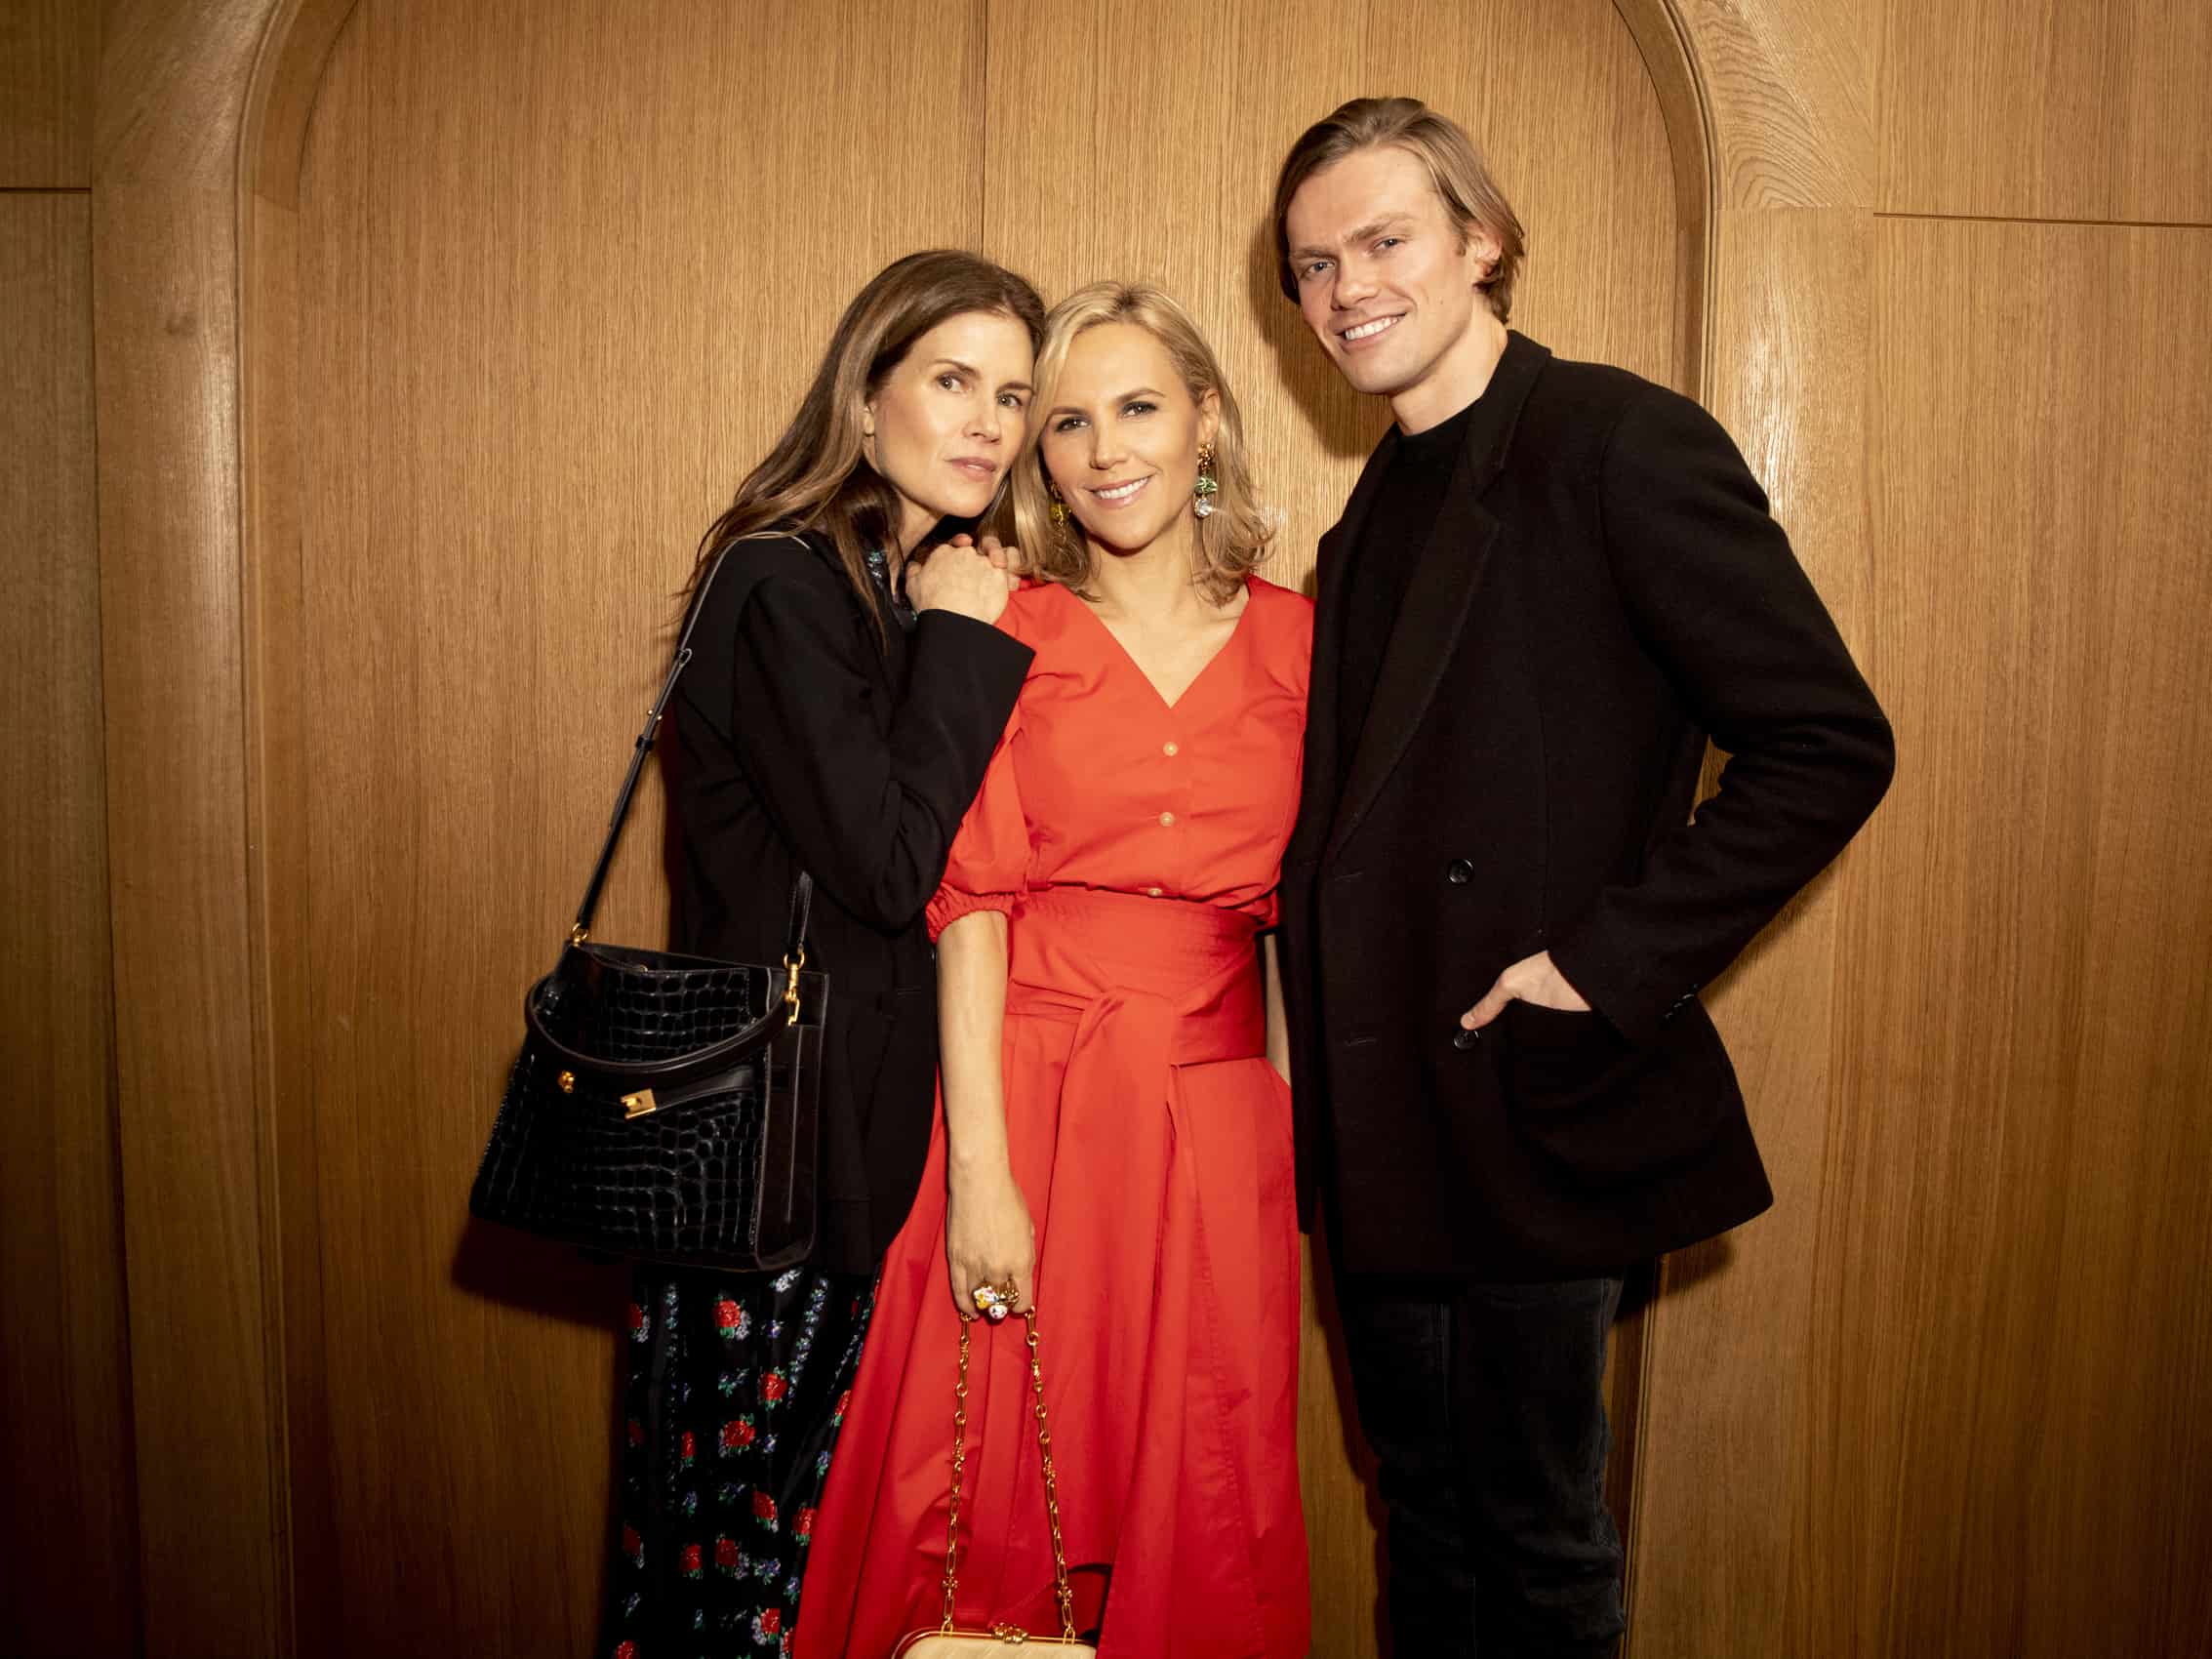 Olivia Palermo Launches Collection, Saks Celebrates Tory Burch